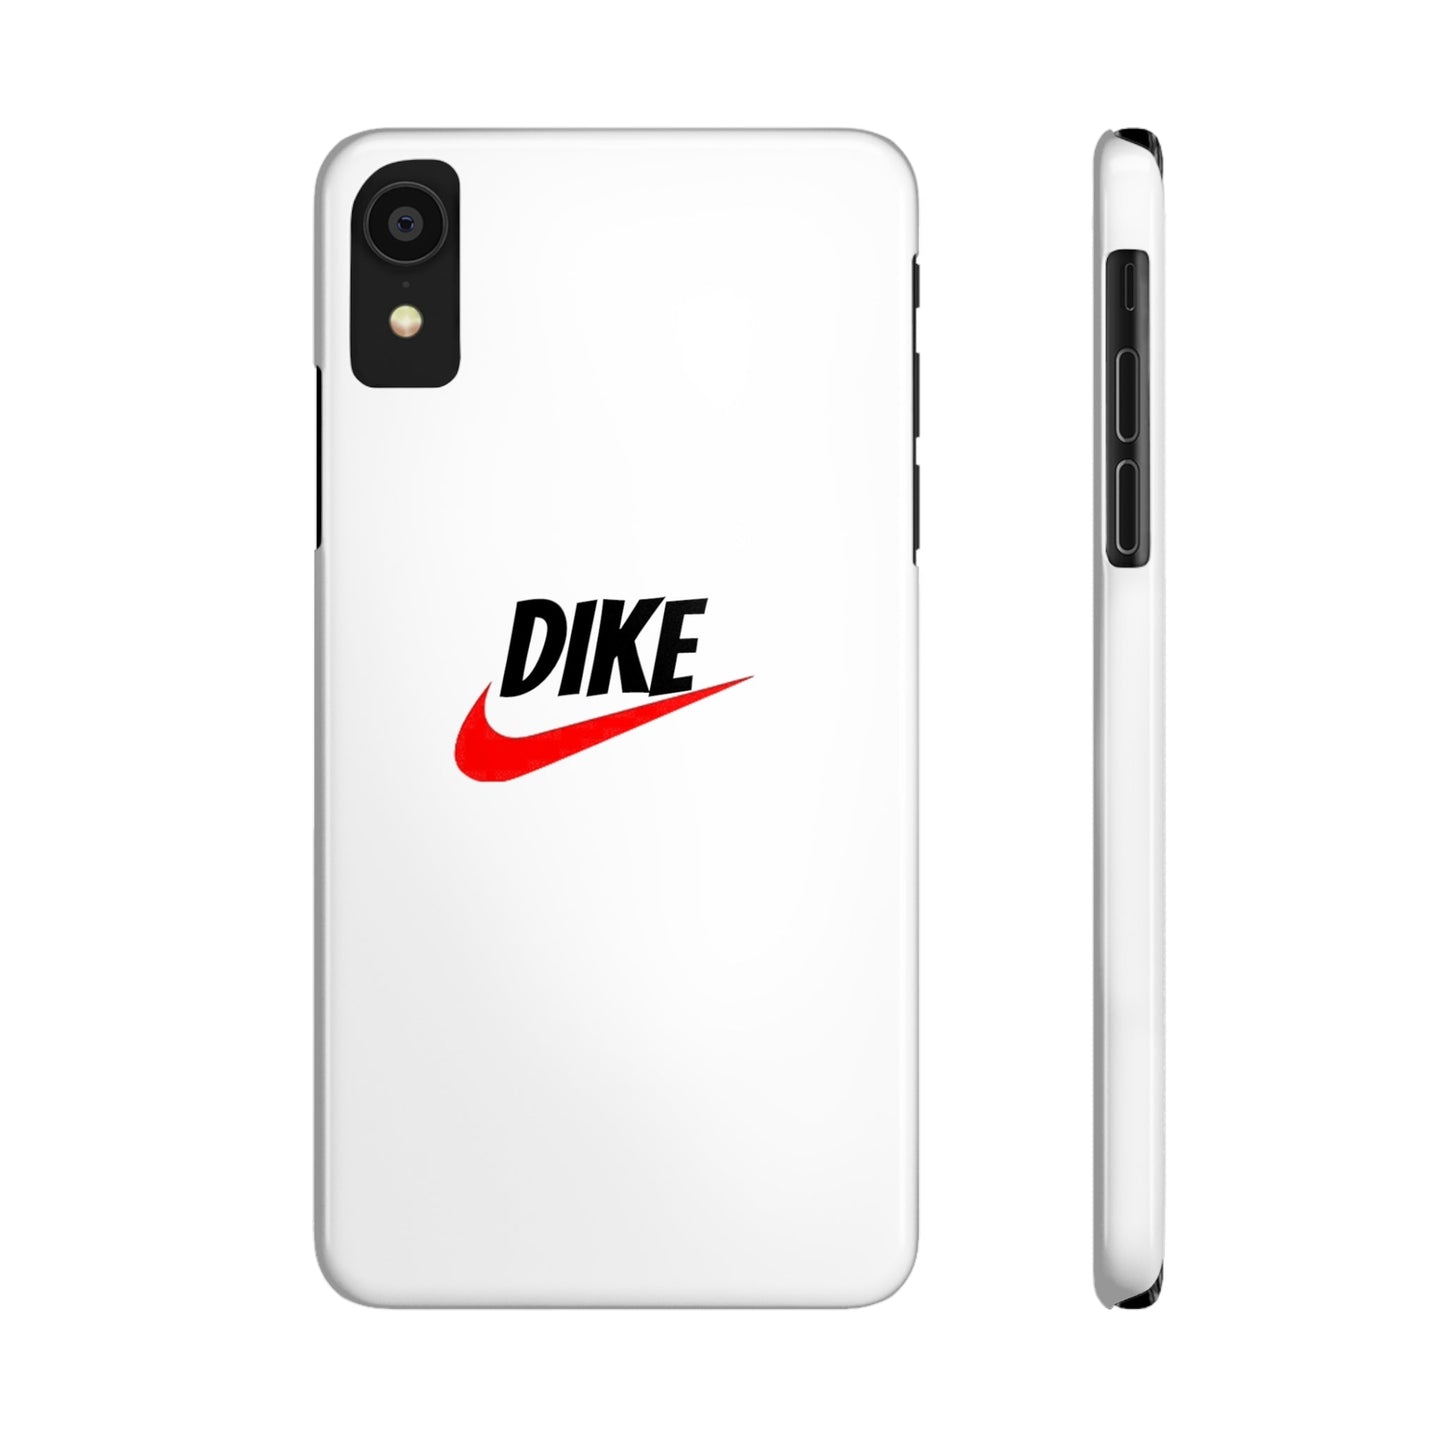 "Dike" MagStrong Phone Cases iPhone XR